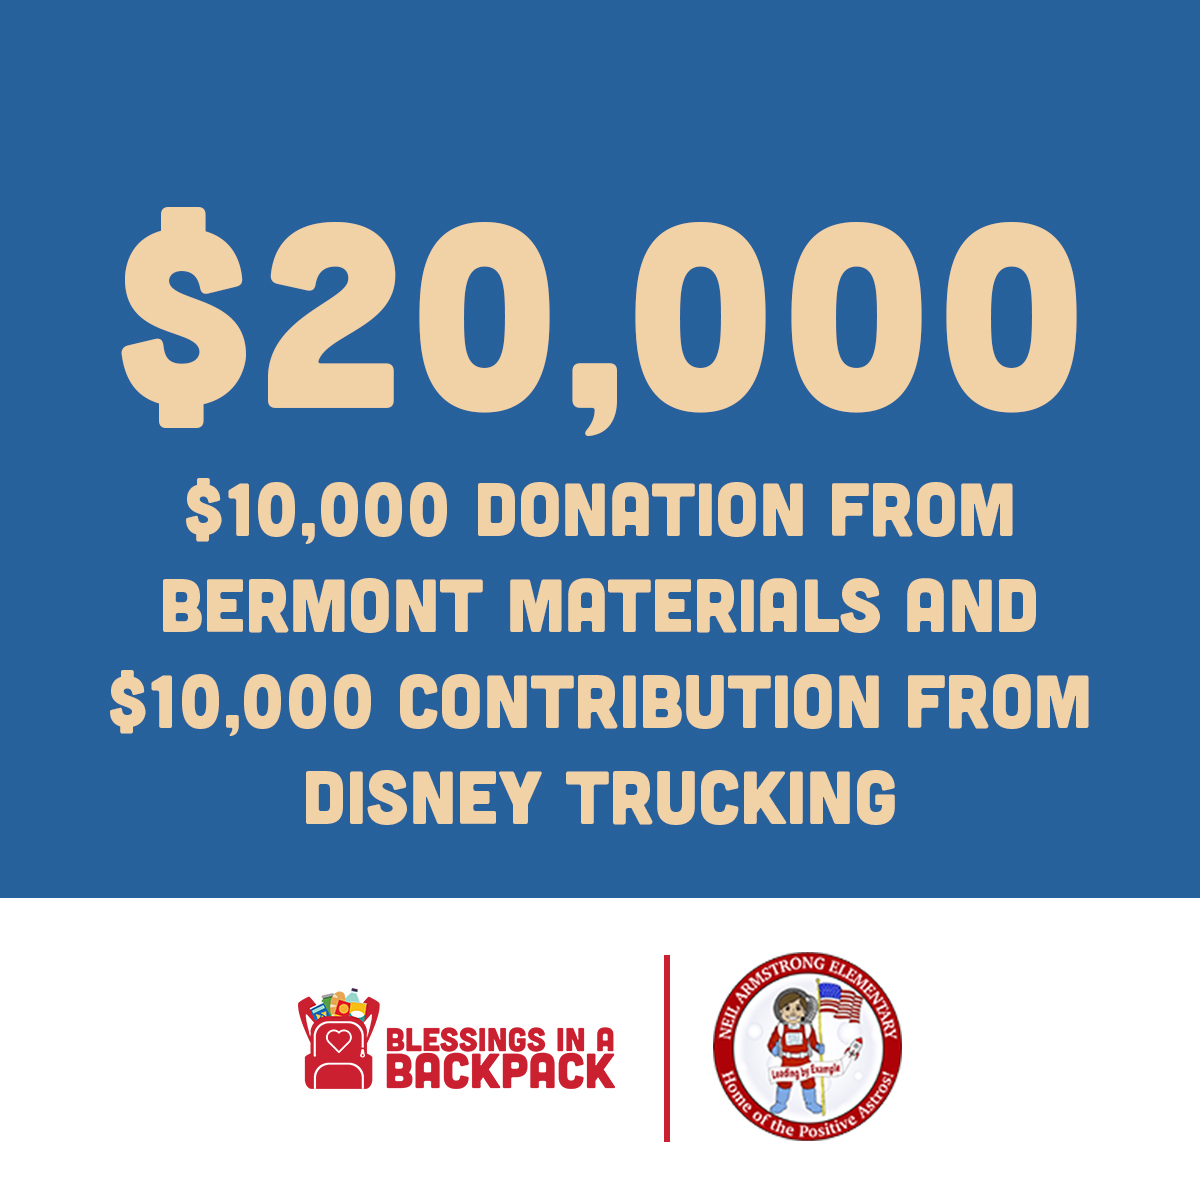 Huge thanks to our school investors who make our mission possible! 🌟

✨Suncoast Credit Union Foundation 
✨O'Donnell Landscaping
✨Bermont Materials
✨Disney Trucking

Thank you for making a difference! 🎒🍎

#ChildhoodHunger #ThankYou